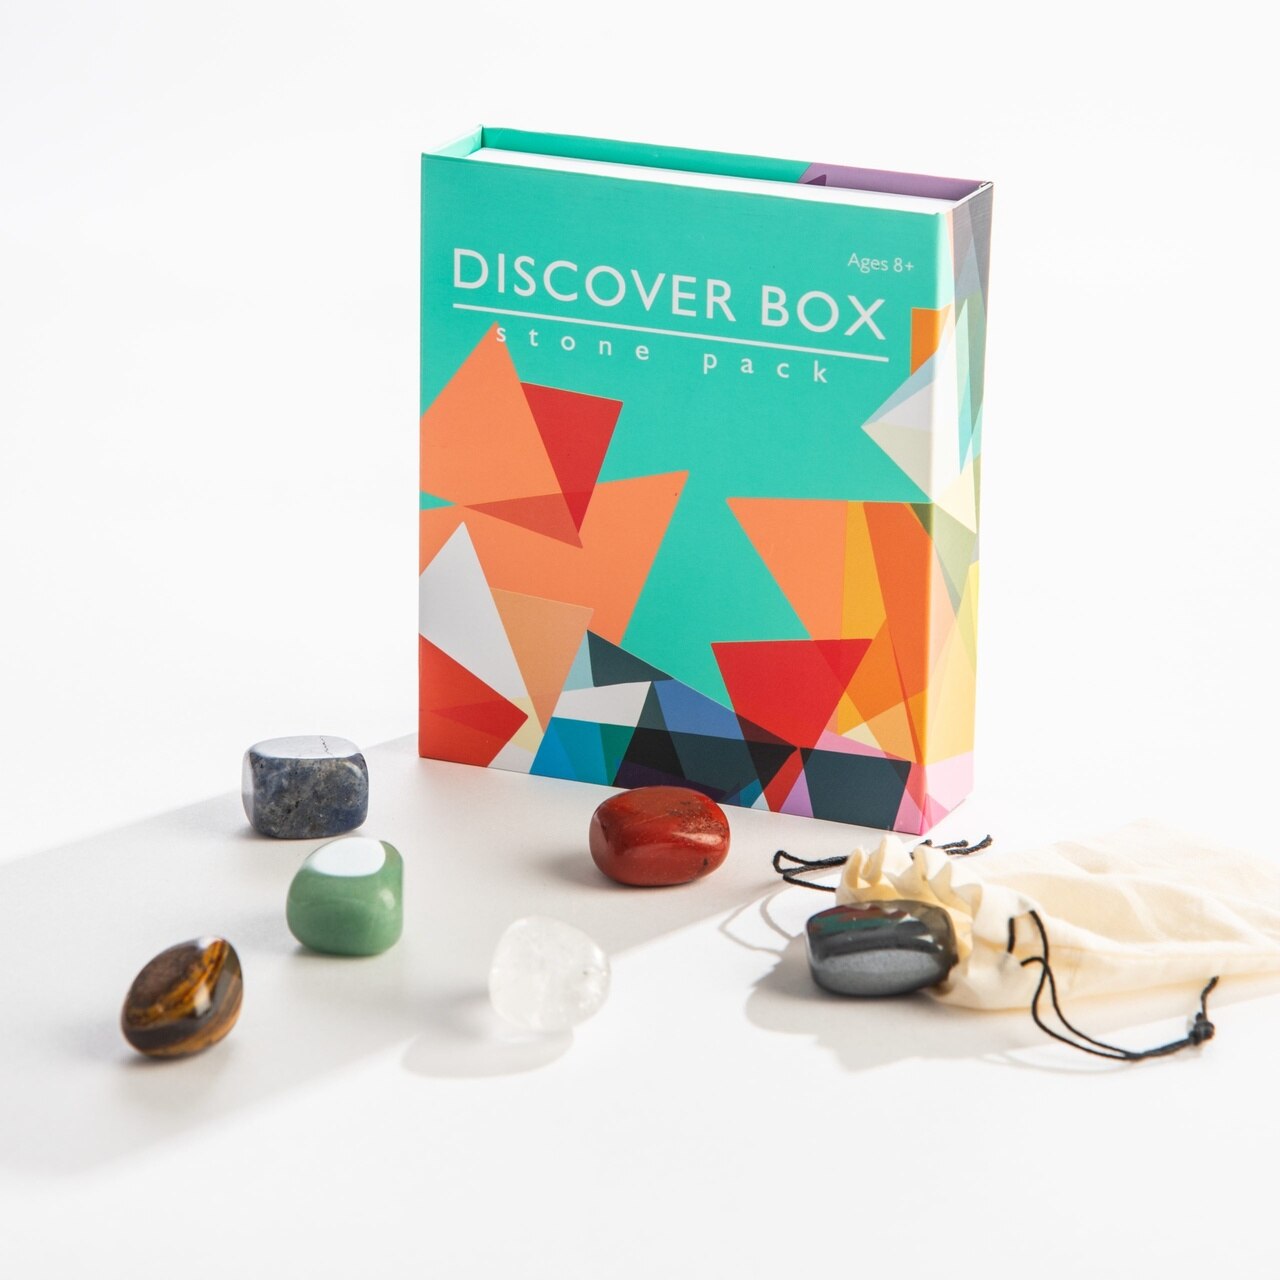 Discover Box Stone Pack - Mellow Monkey